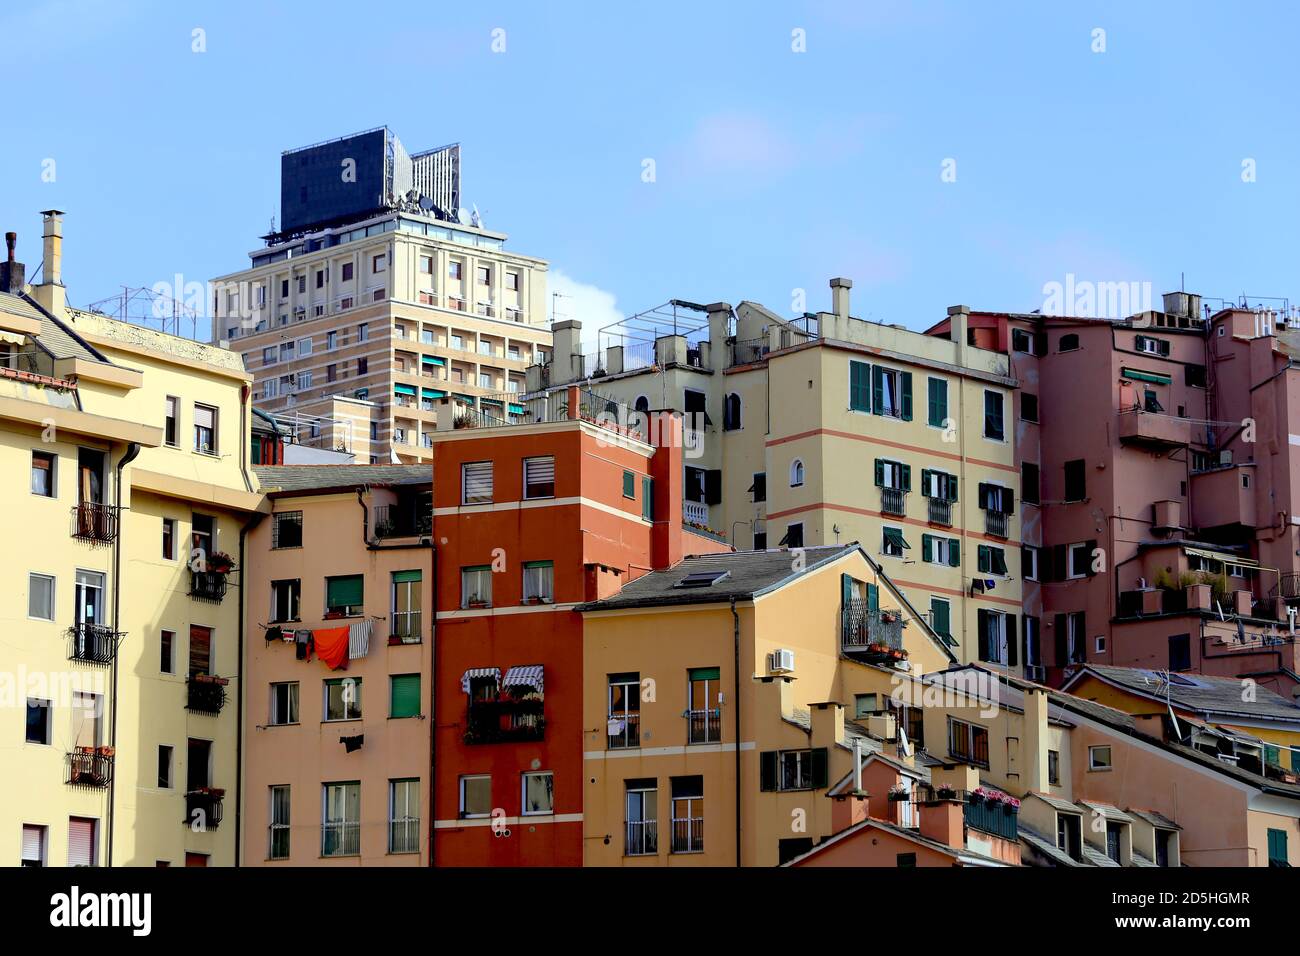 Genoa, Italy. Wide view of colorful houses in Genoa historic city center against a contemporary building and a blue sky in the San Agostino hill. Stock Photo